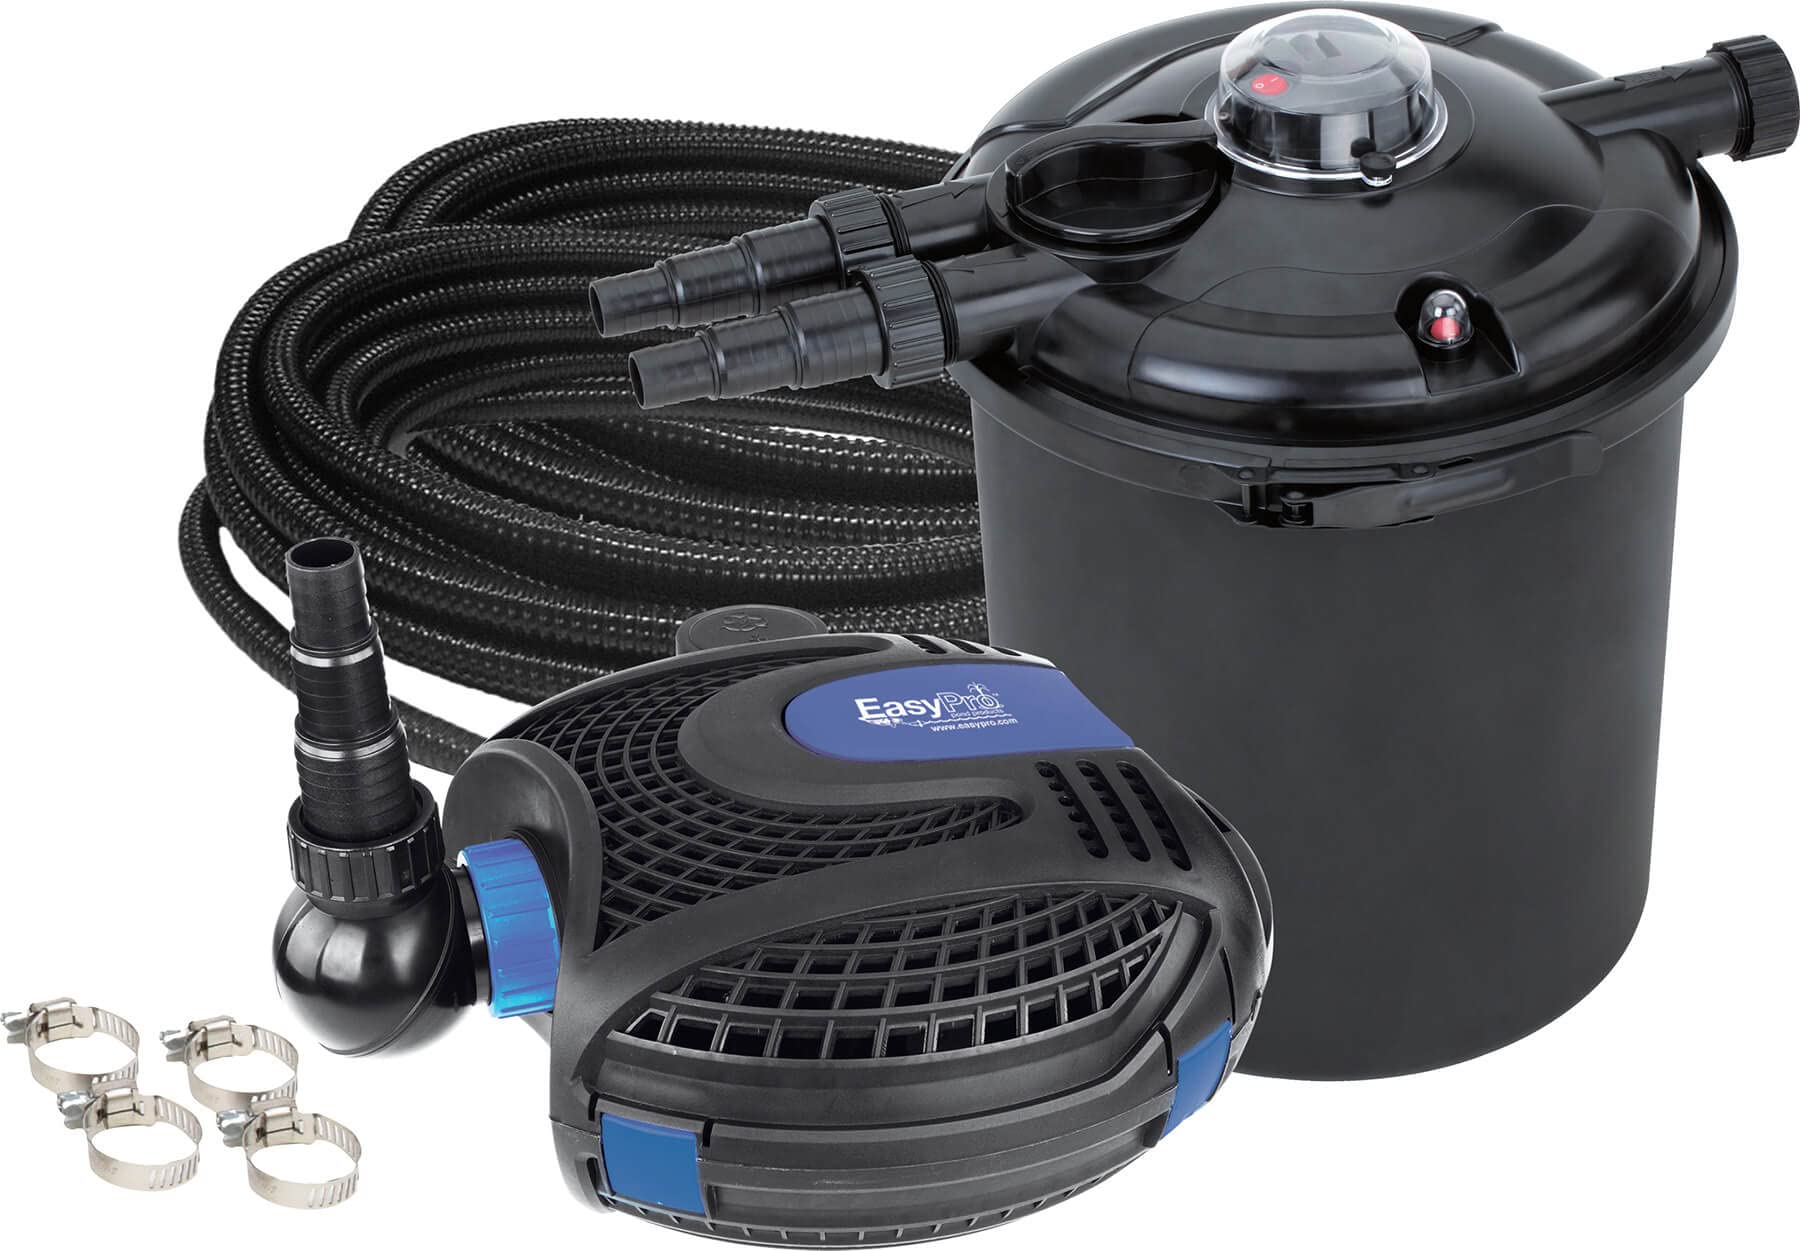 EasyPro ECK13UDX Eco-Clear Complete Pond Filtration System | Contains EC2600U Filter | EPS1300 Eco-Clear Submersible Pump | 25 feet of 1 1/4″ kink-free tubing | 4 clamps | For ponds up to 1300 Gallons